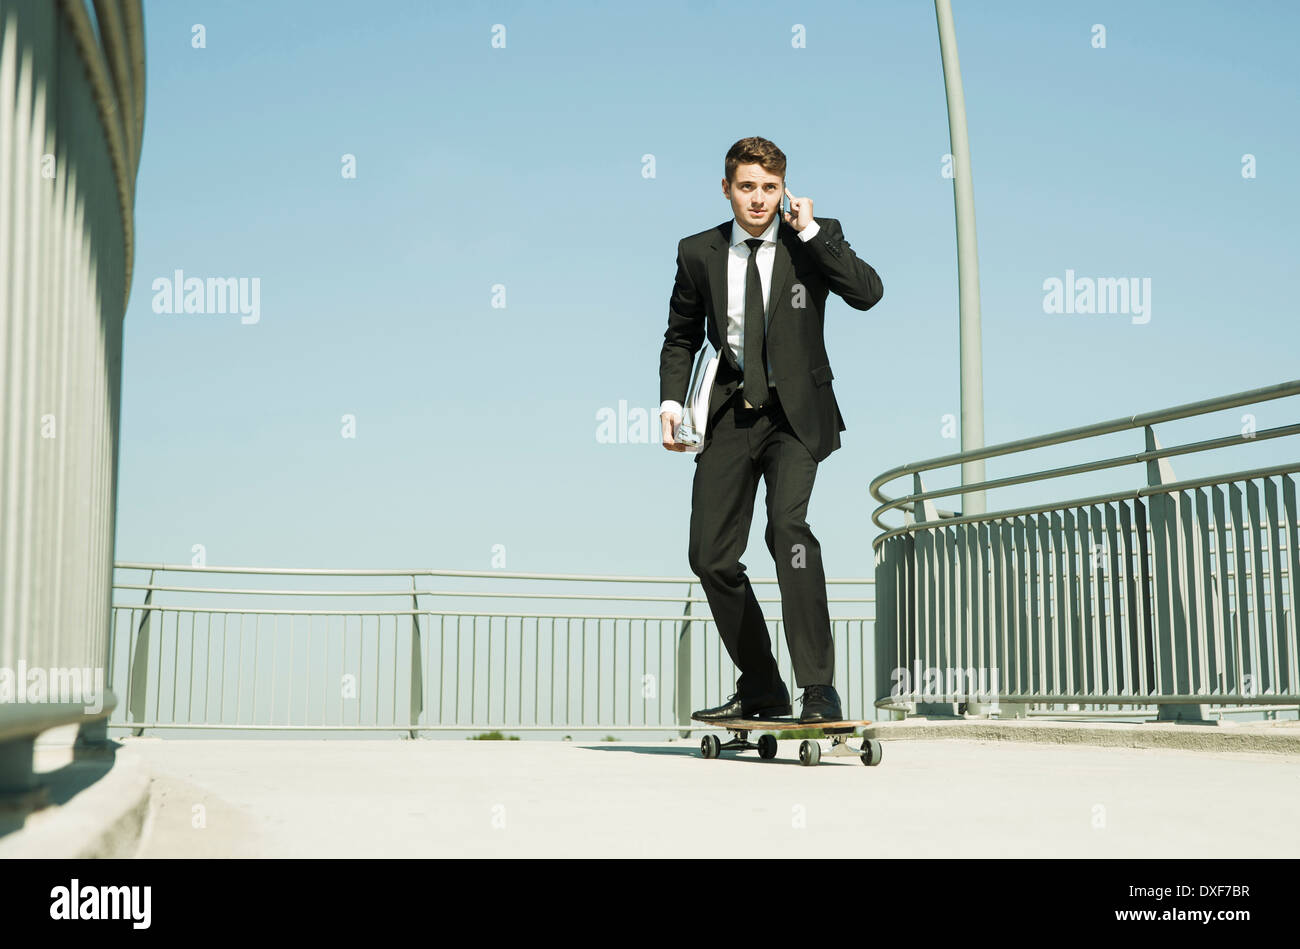 Businessman using Cell Phone while Skateboarding, Mannheim, Baden-Wurttemberg, Germany Banque D'Images